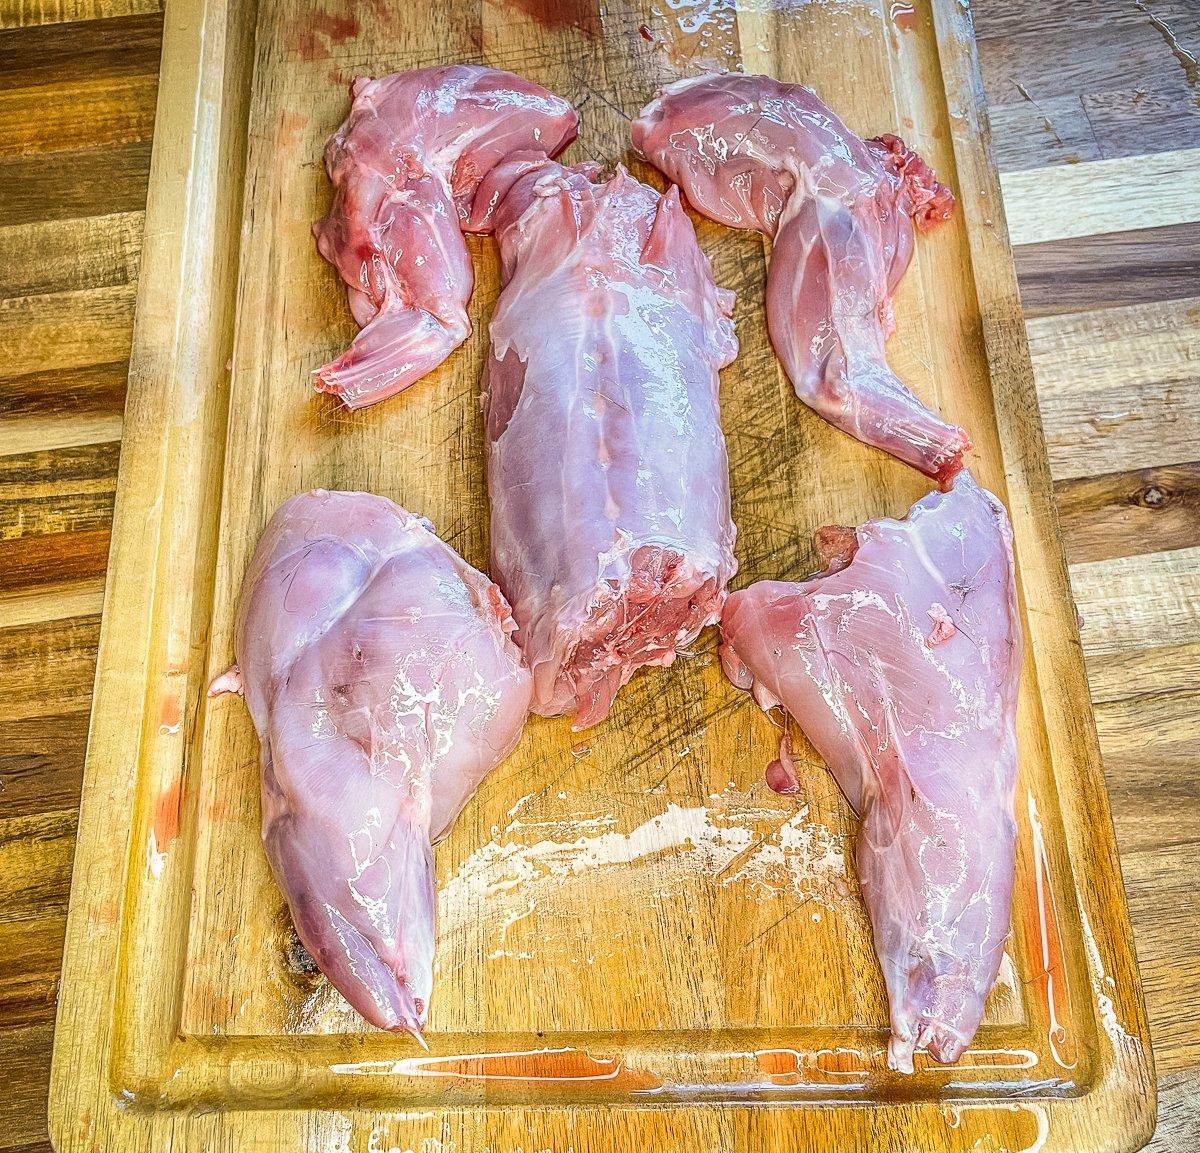 Separate the rabbit into back and leg quarters.